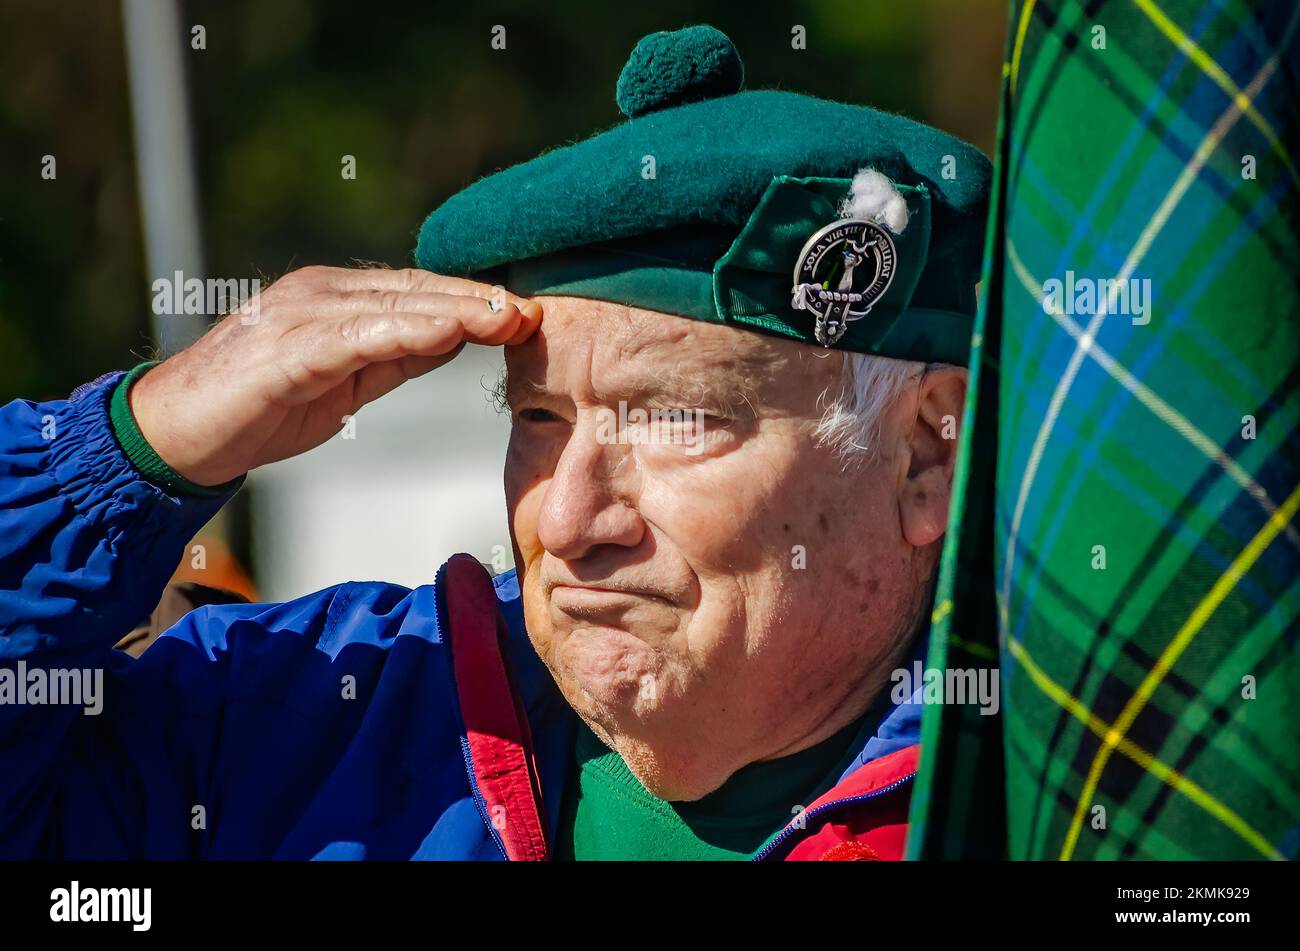 A man salutes as he holds a tartan representing the Henderson clan during the parade of clan tartans at the Scottish Highland Games in Gulfport, Miss. Stock Photo